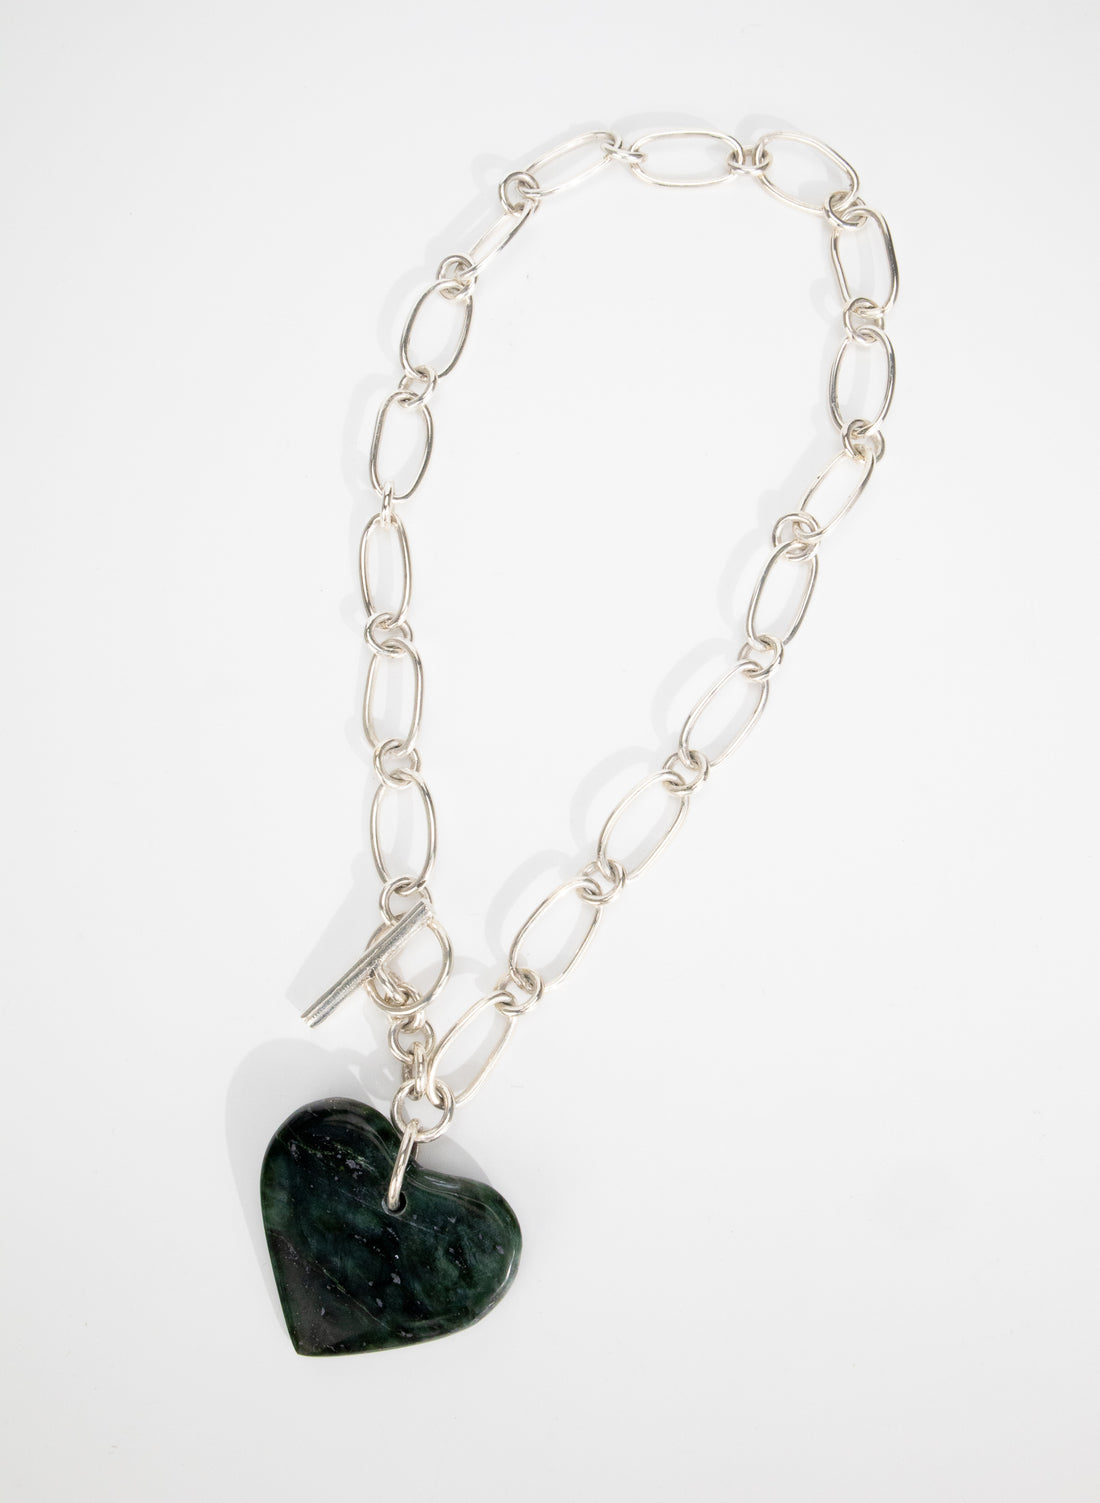 Chunky Heart Necklace